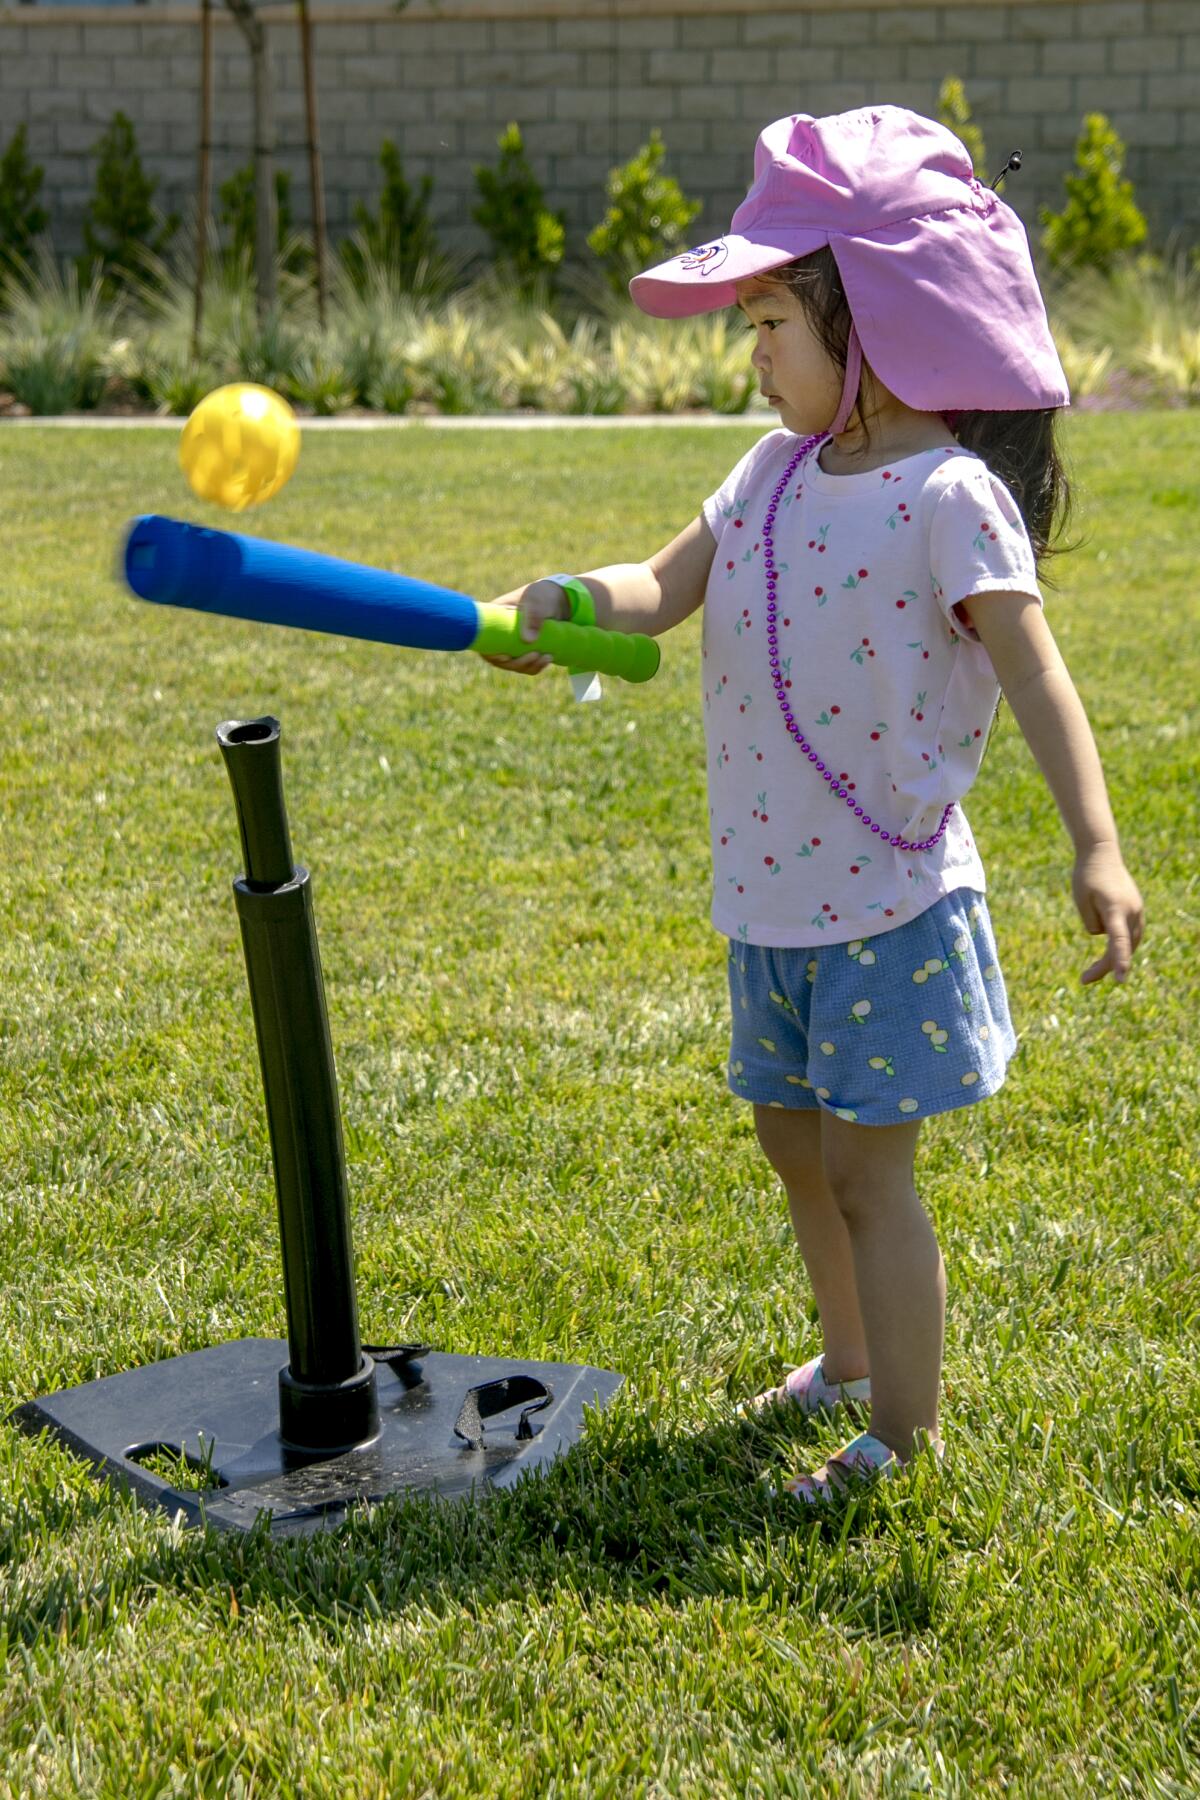 3-year-old Teal Lam cautiously smacks a wiffle ball in Moiola Park.